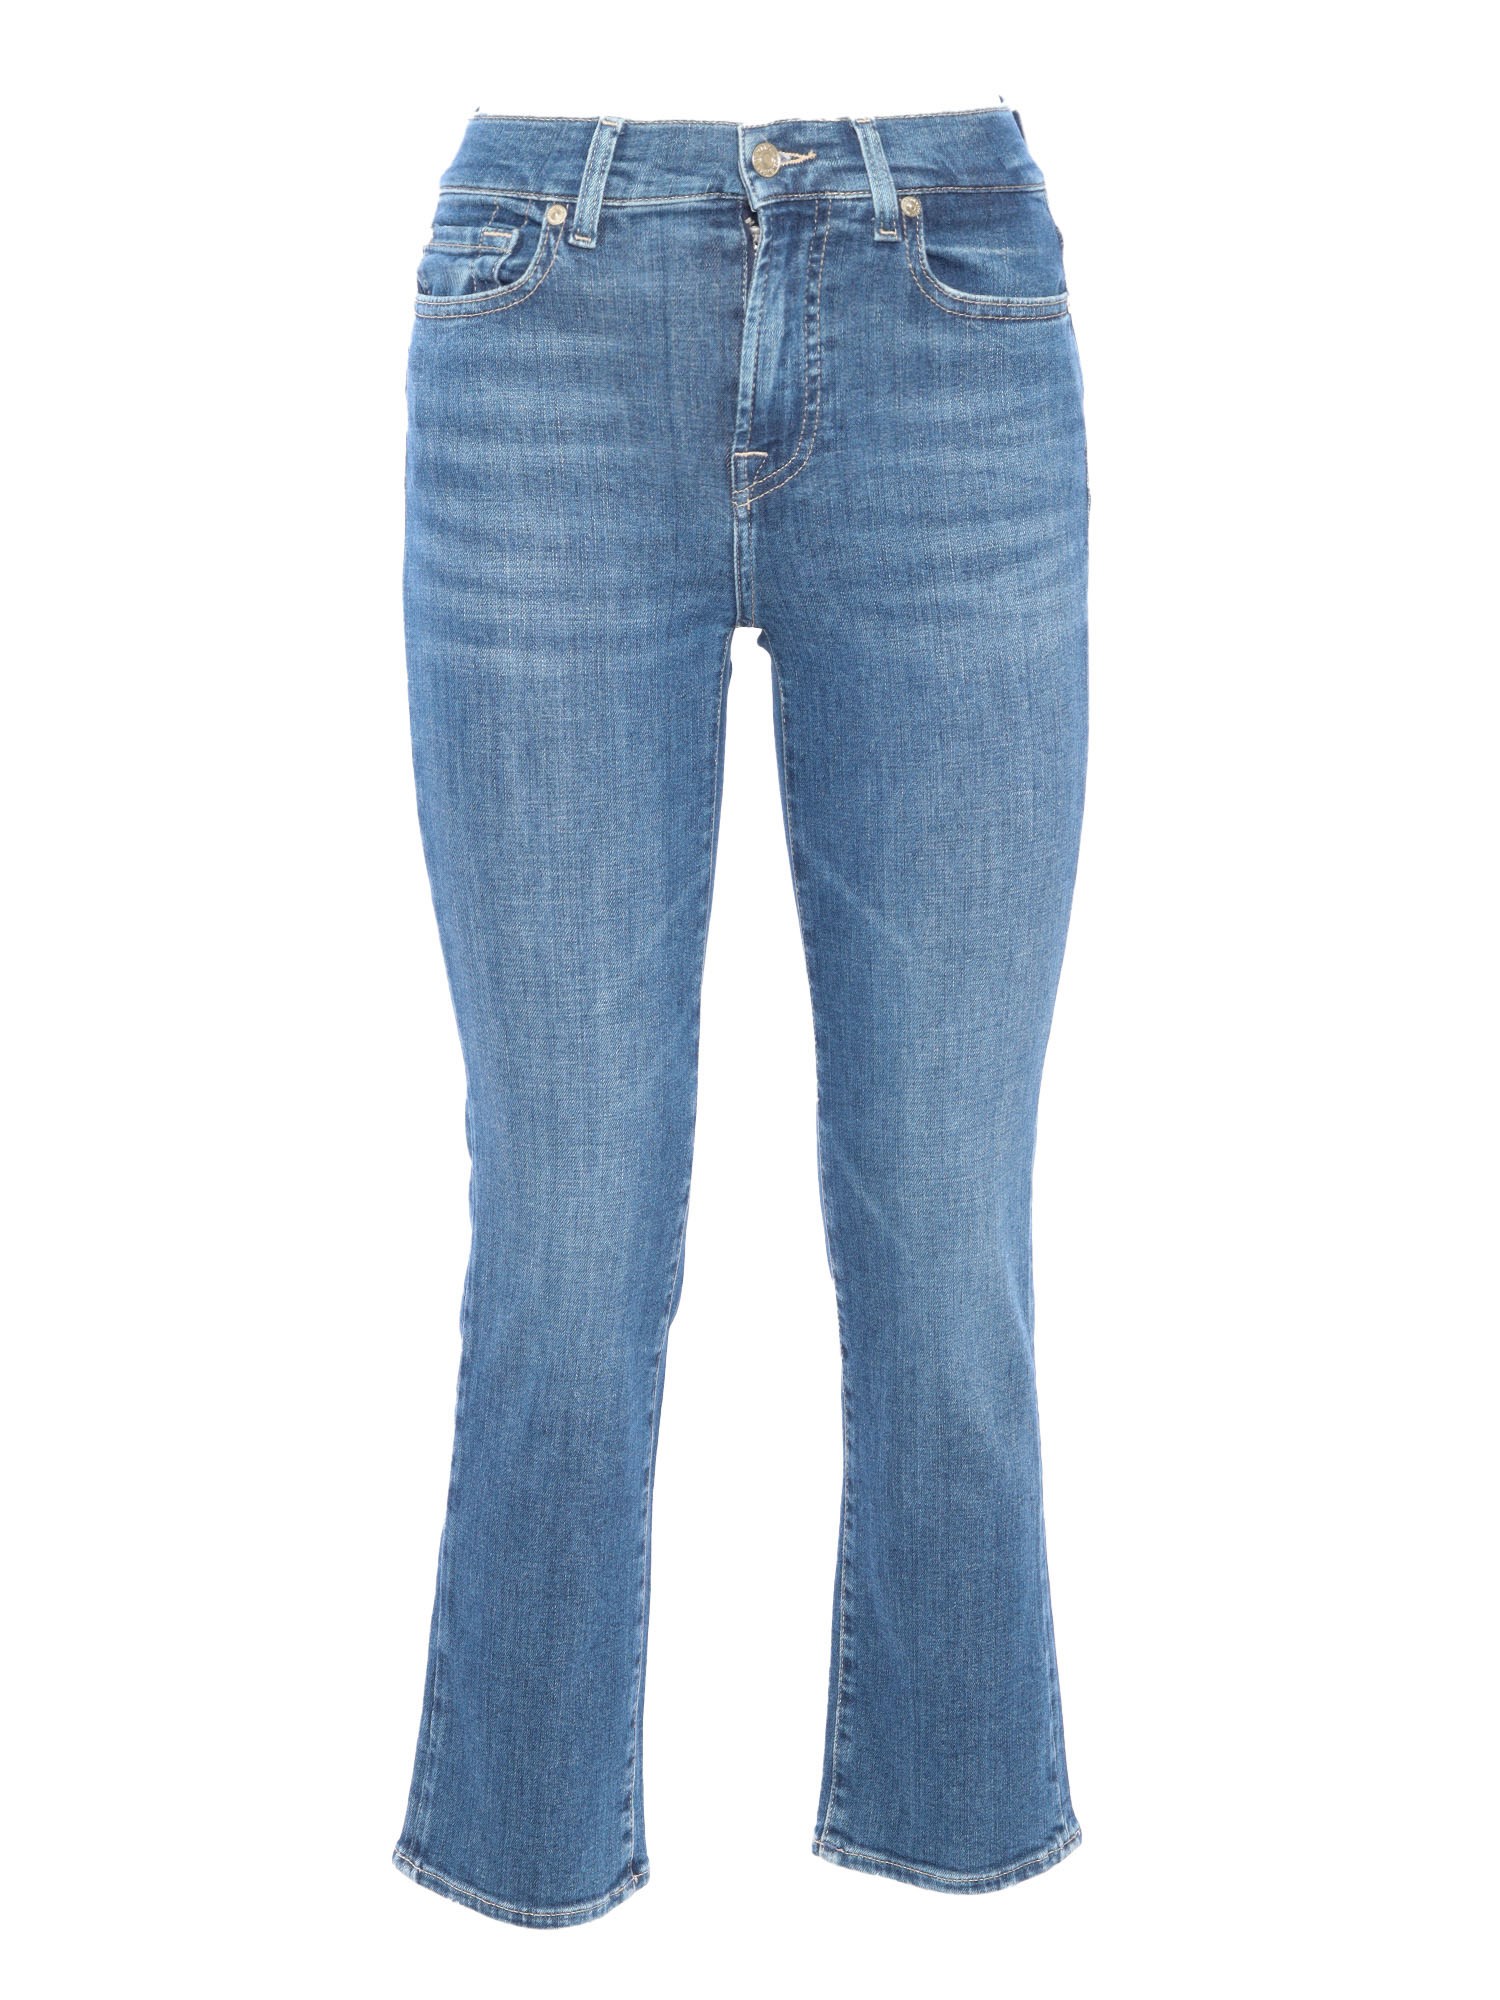 Shop 7 For All Mankind Cropped Women's Jeans. In Blue